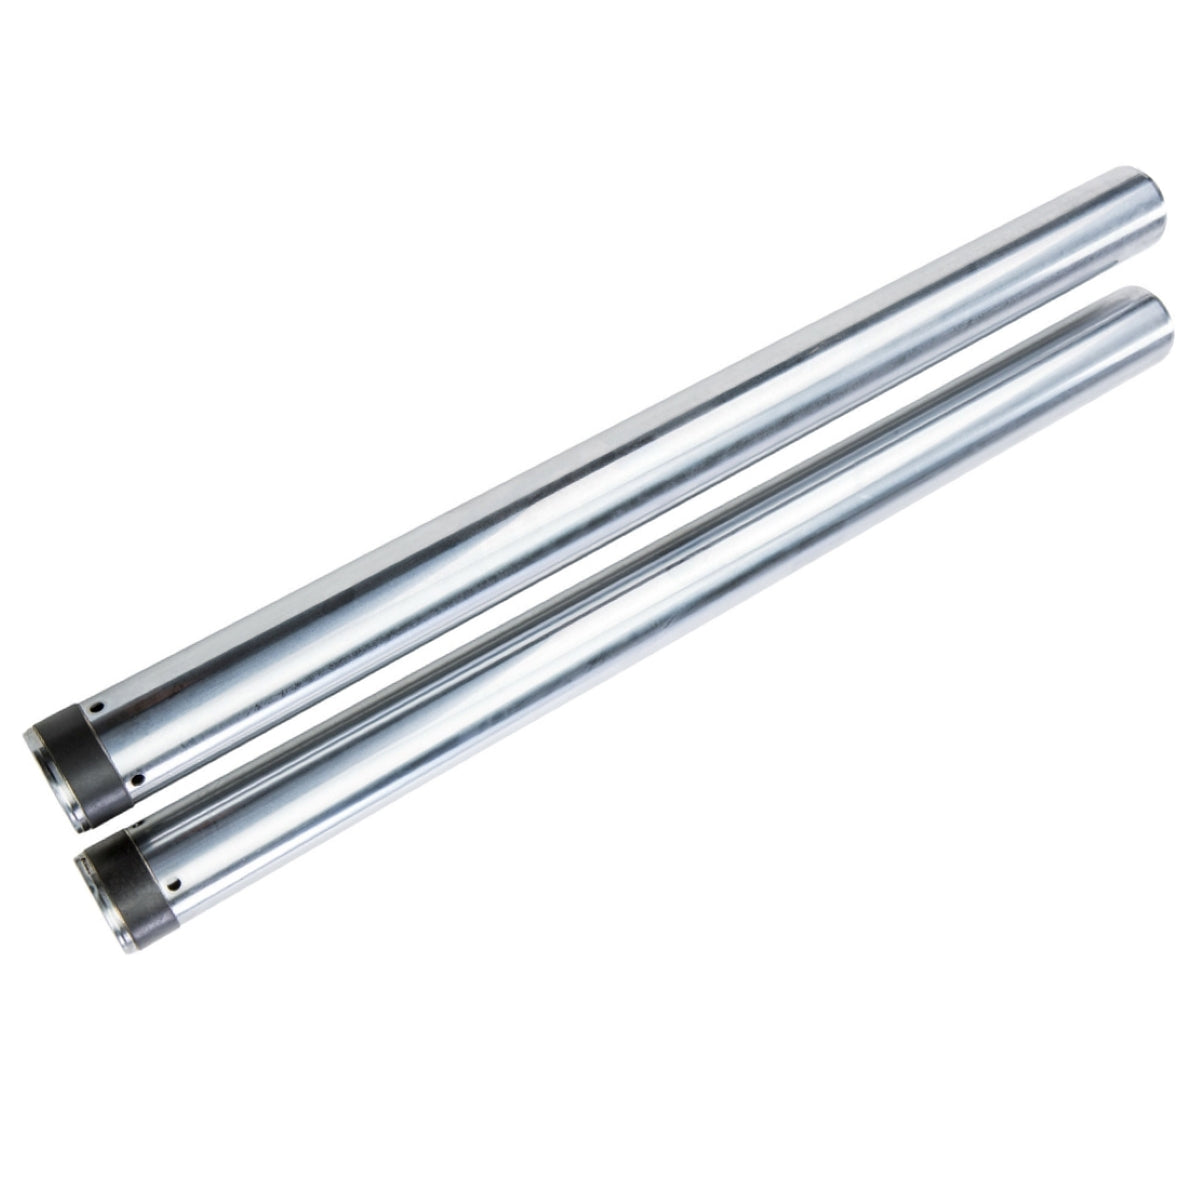 GeezerEngineering 49mm Fork Tubes for Harley Touring Models 2014 and later